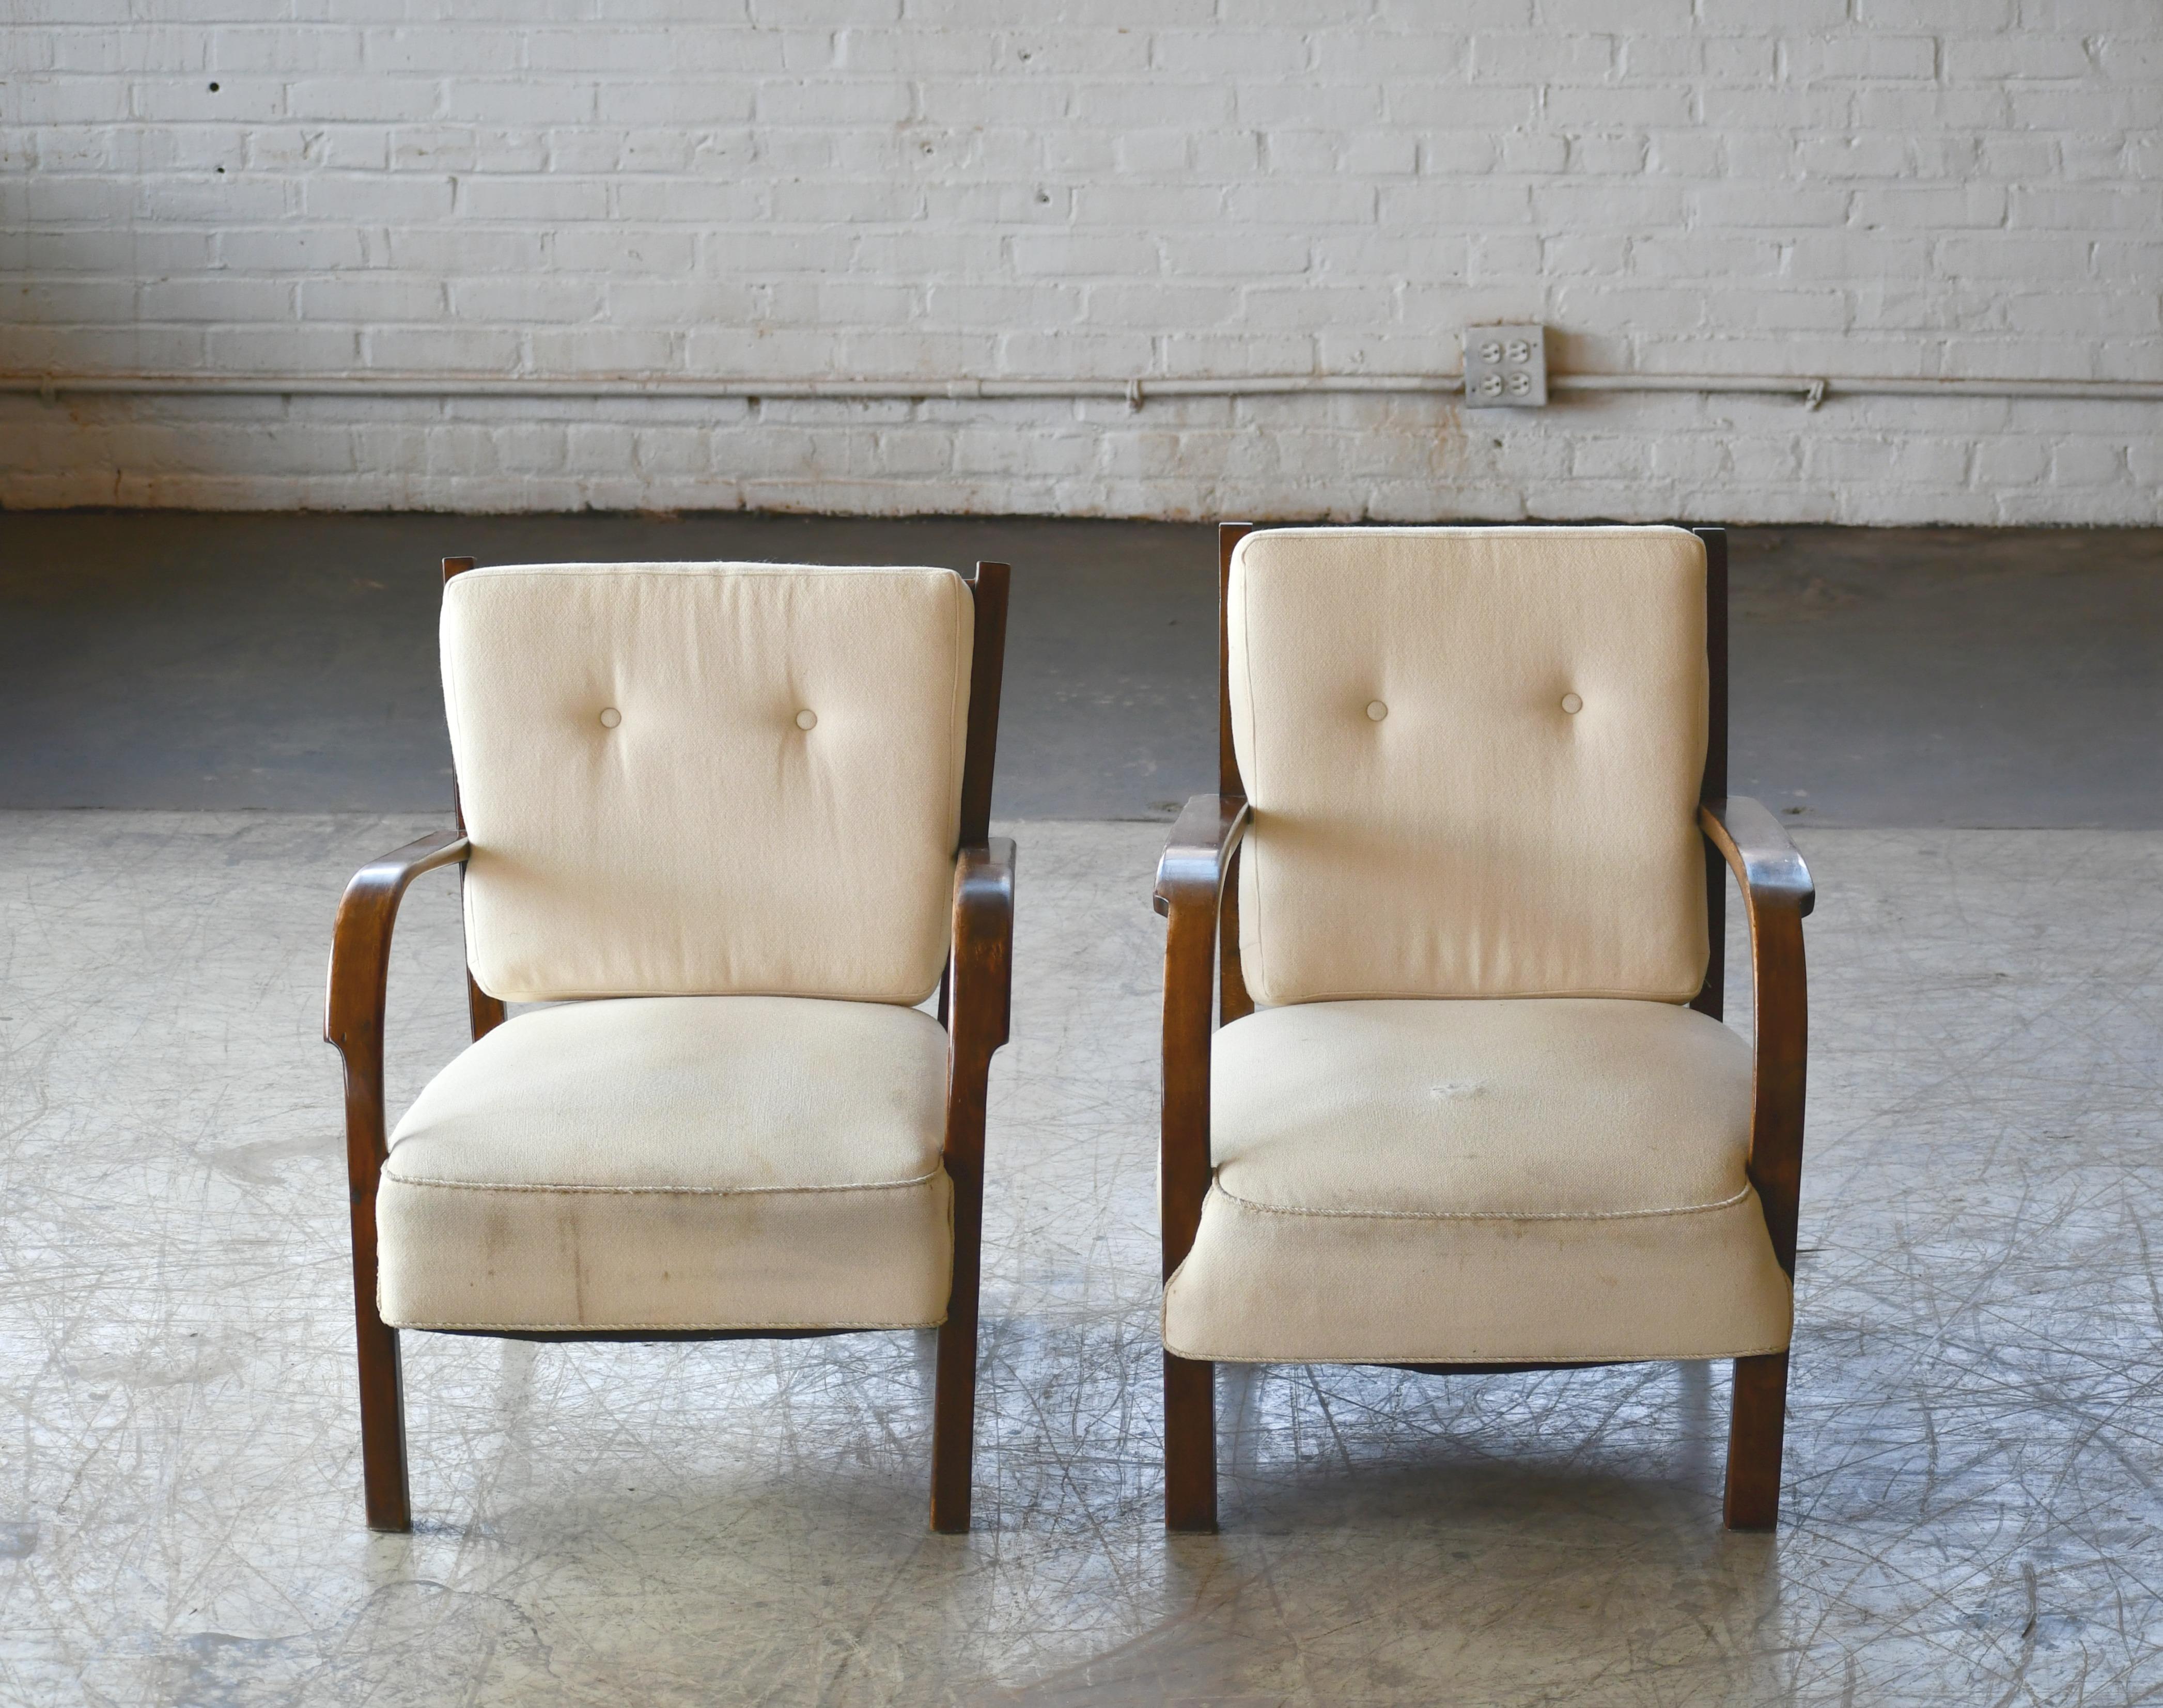 Very elegant late Art Deco pair of easy chairs by Fritz Hansen. We found these chairs in Copenhagen and did not really know much about them but just found them really attractive. They are made of Cuban mahogany which indicated that they likely are